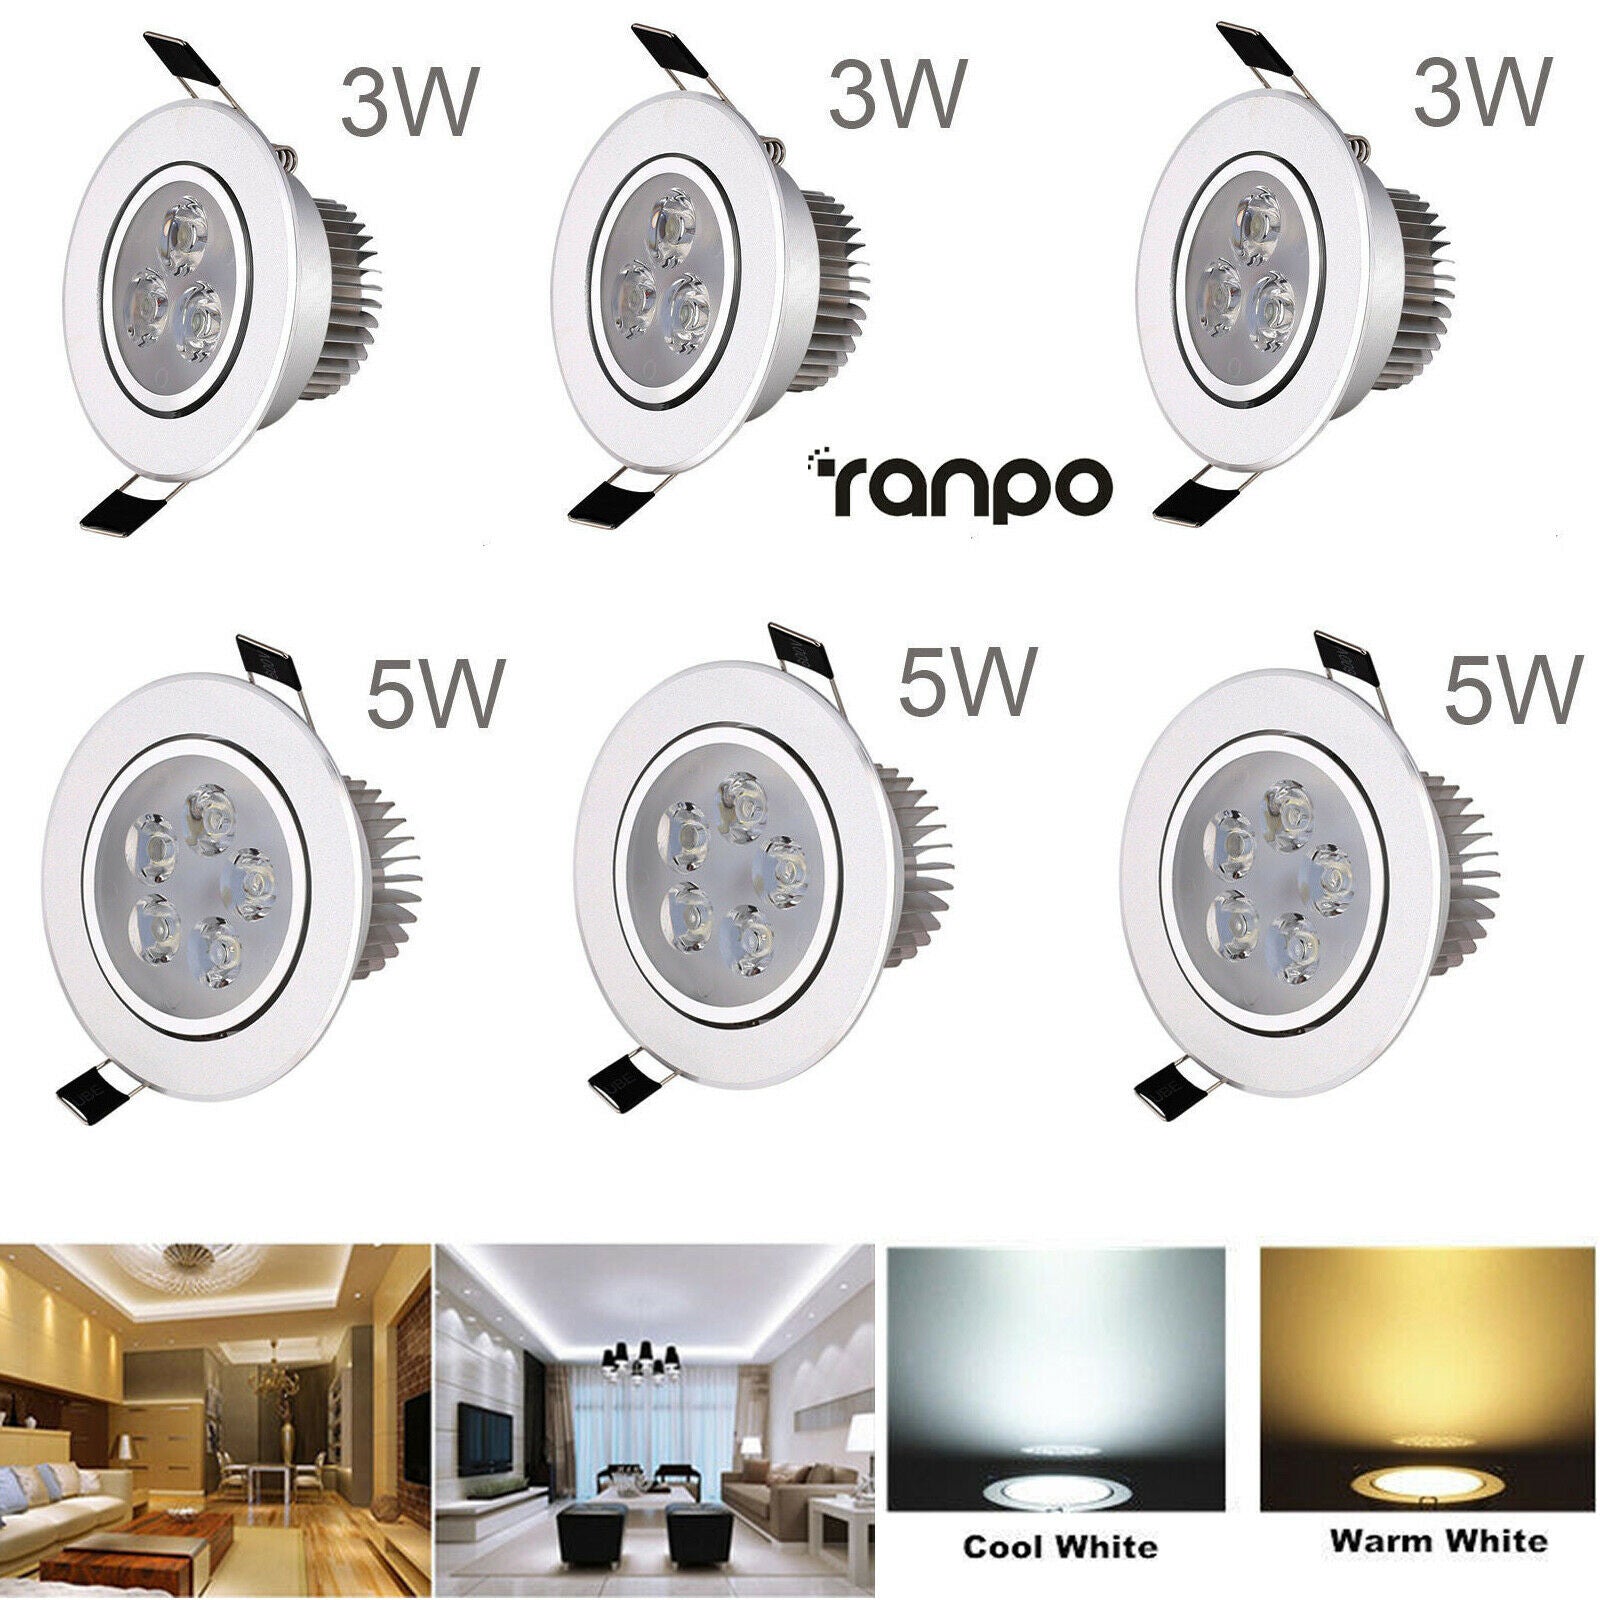 Dimmable LED Recessed 3W 5W Ceiling Down Light Panel Lamp Cool Warm White AC 220V 110V Downlight Spotlight for Home Office Hotel